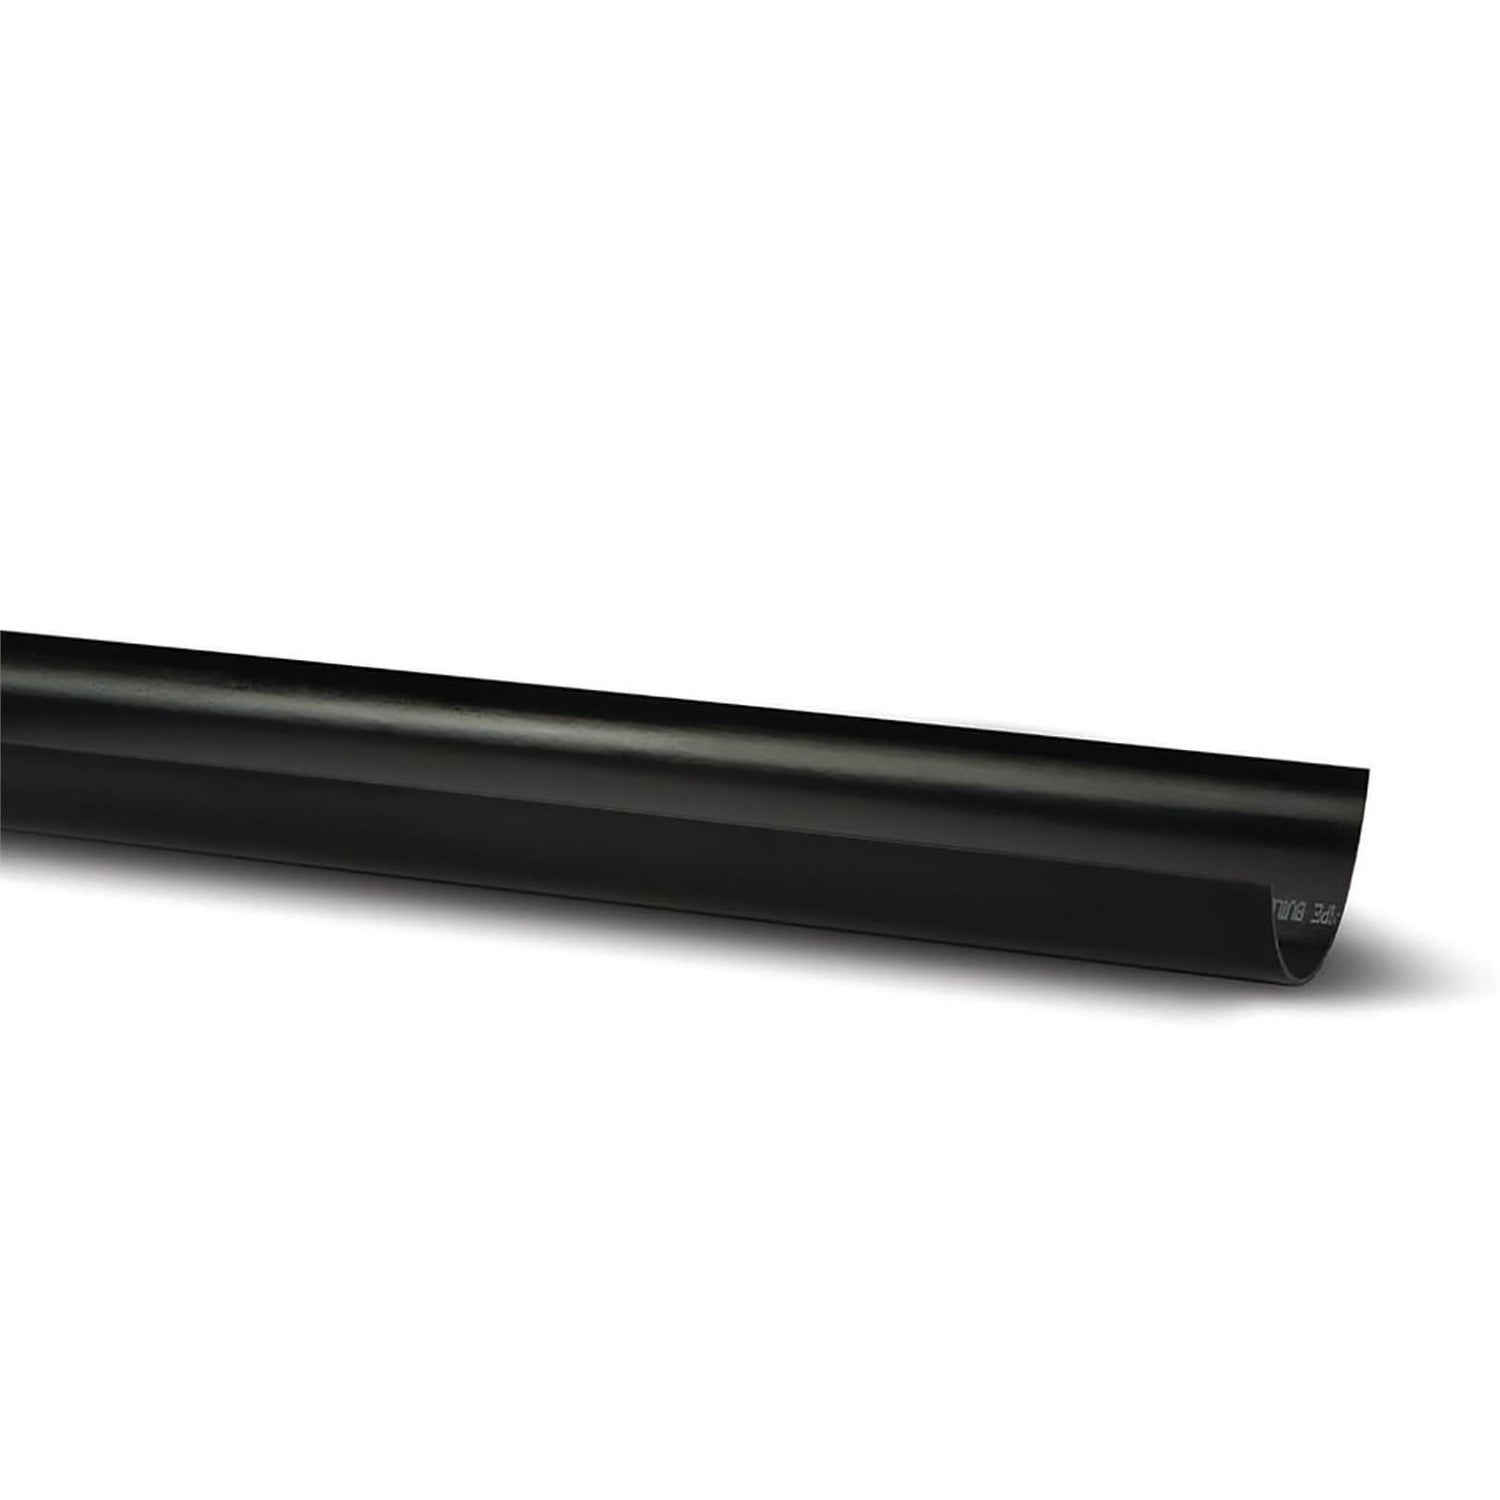 Porch etc to Suit 75mm Mini guttering Conservatory RM350b Black 2 x 1 metre Lengths of Polypipe Mini 53mm Round DOWNPIPE for shed Not Suitable for Hunter or Floplast Mini Systems 